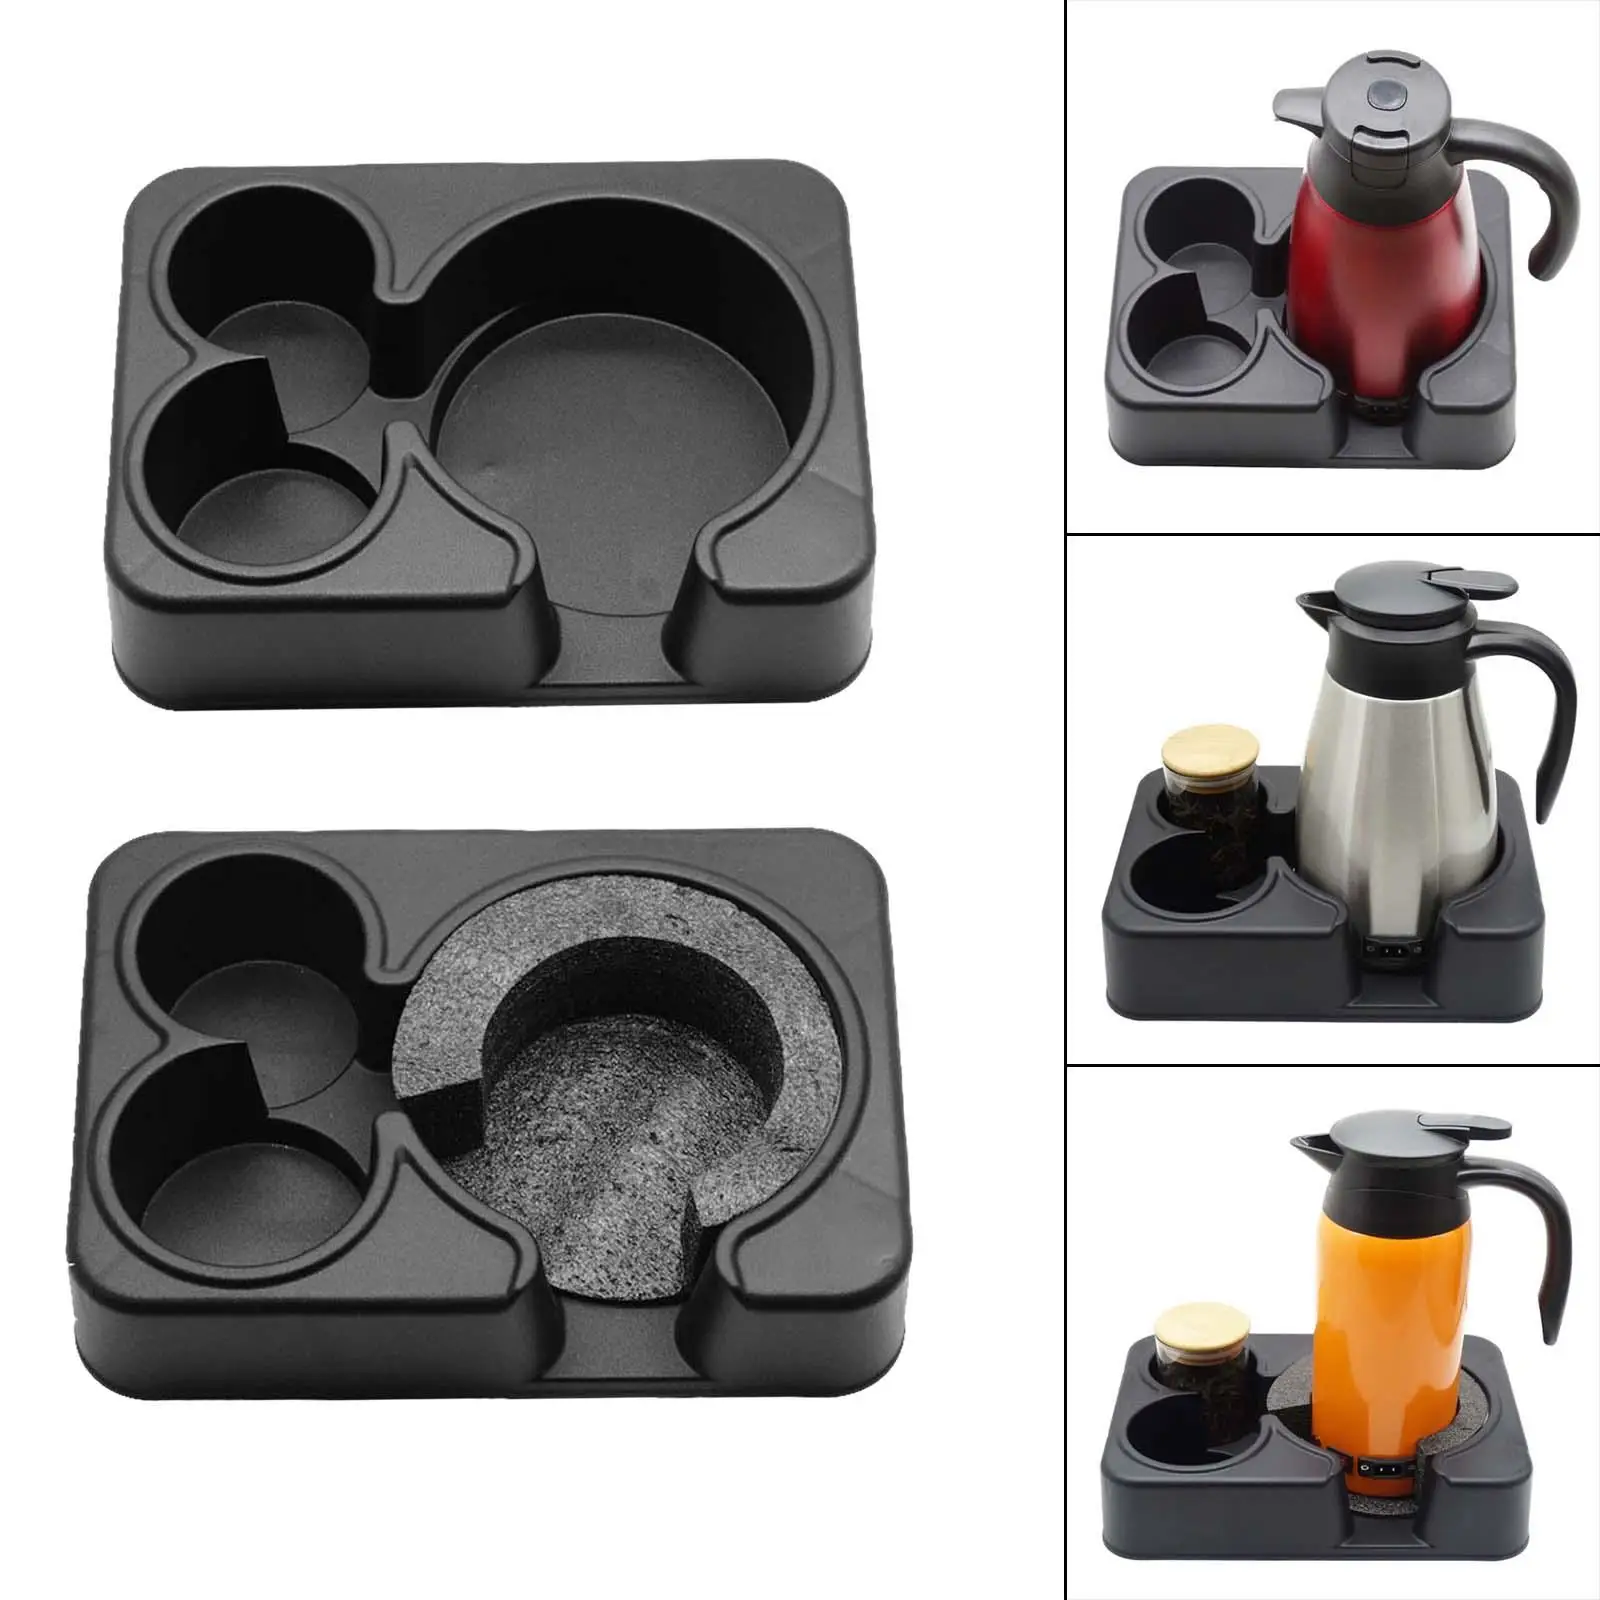 Water Cup Bracket, Bottle Stand Professional Accessories, Storage Practical Parts car pot Holder for Vehicle Auto SUV Car